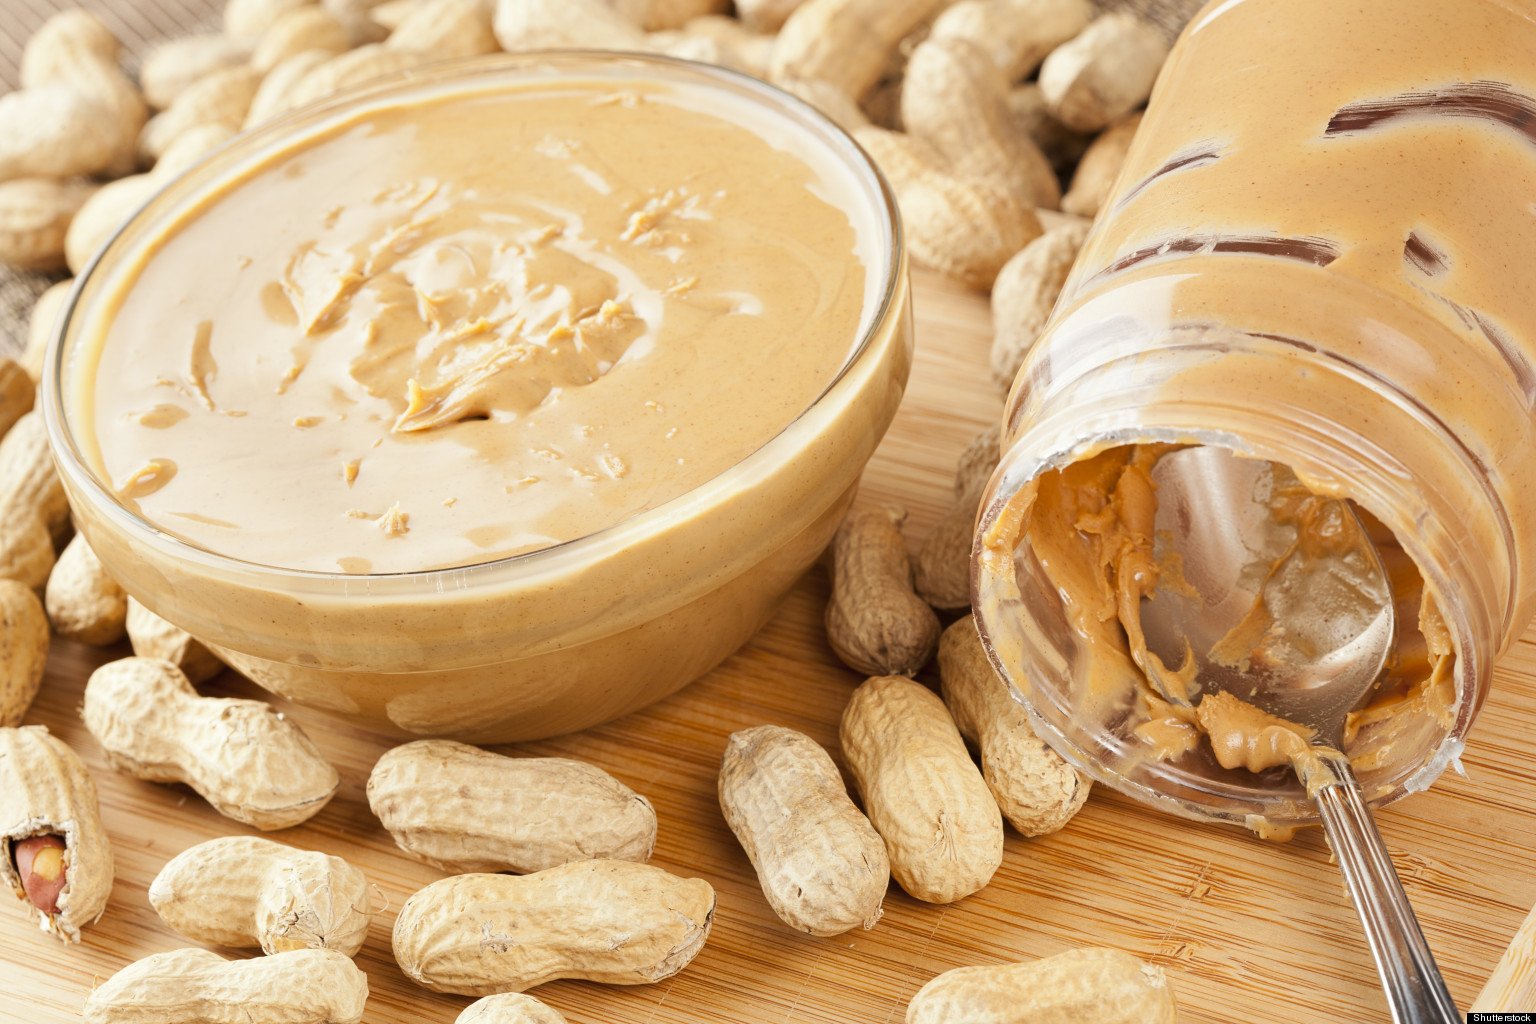 8 Health Benefits Of Eating Peanut Butter Regularly